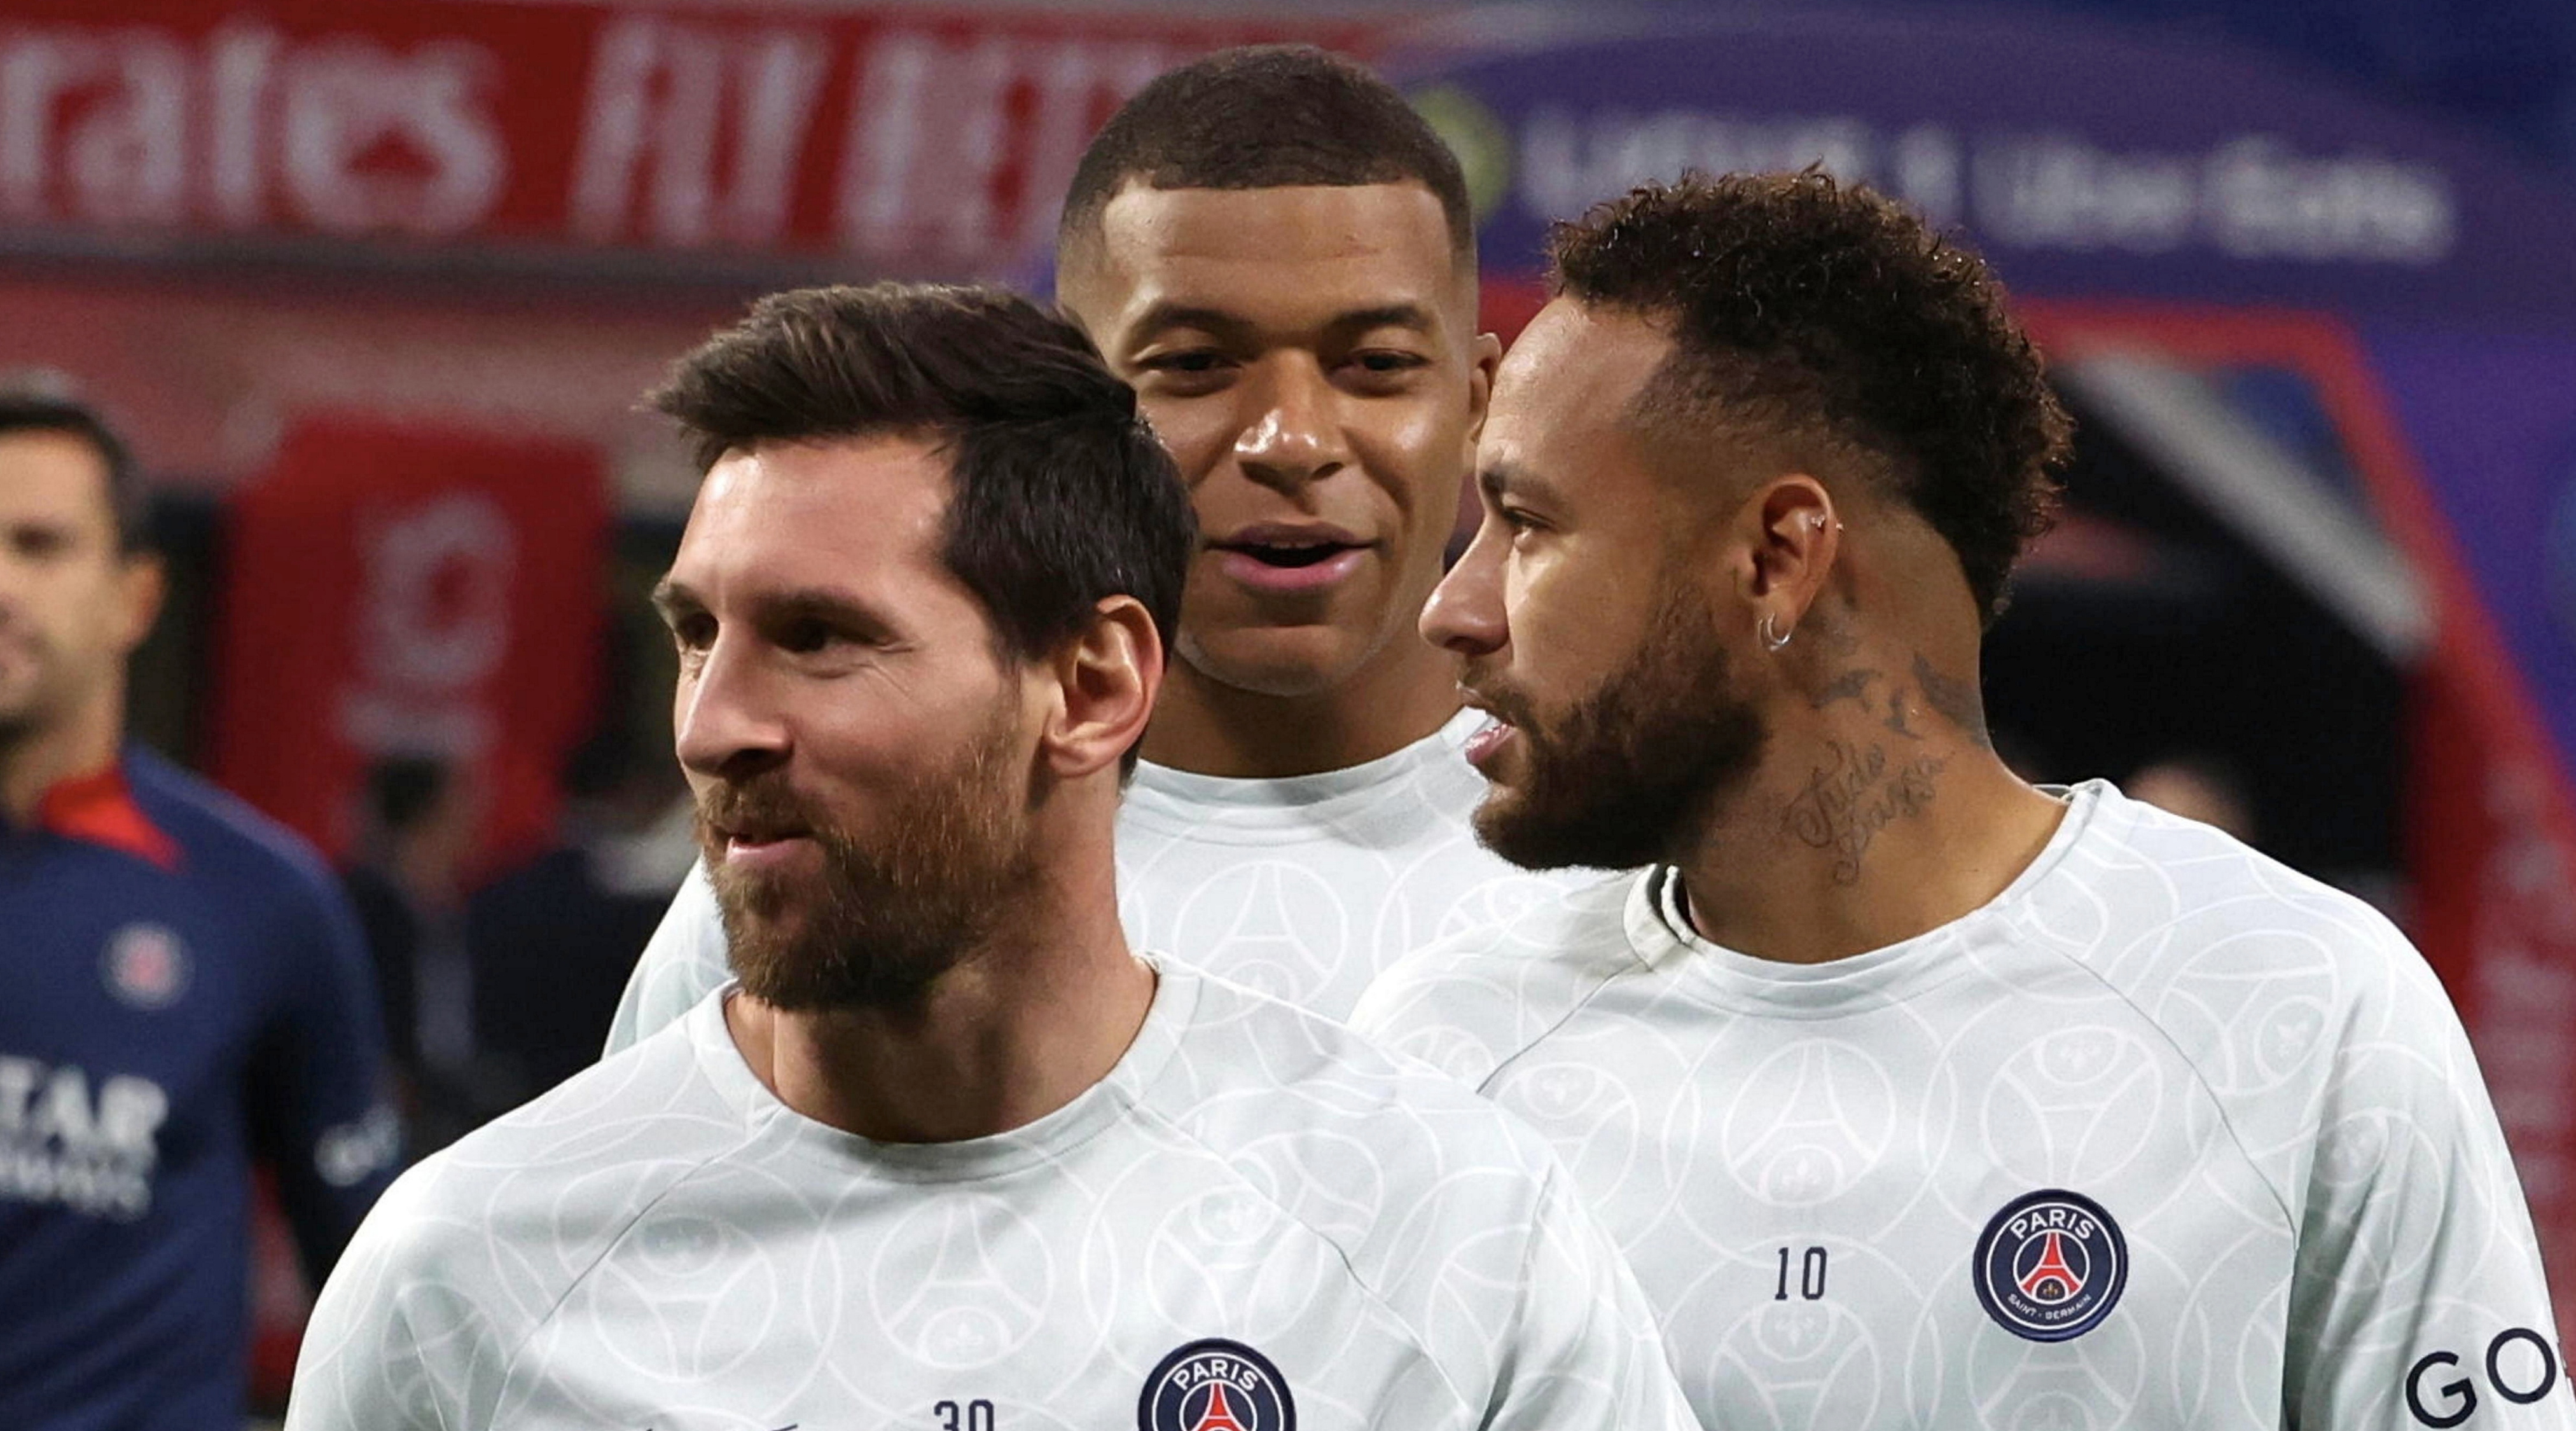 PSG vs Marseille live stream, match preview, team news and kick-off time for the Ligue 1 clash FourFourTwo